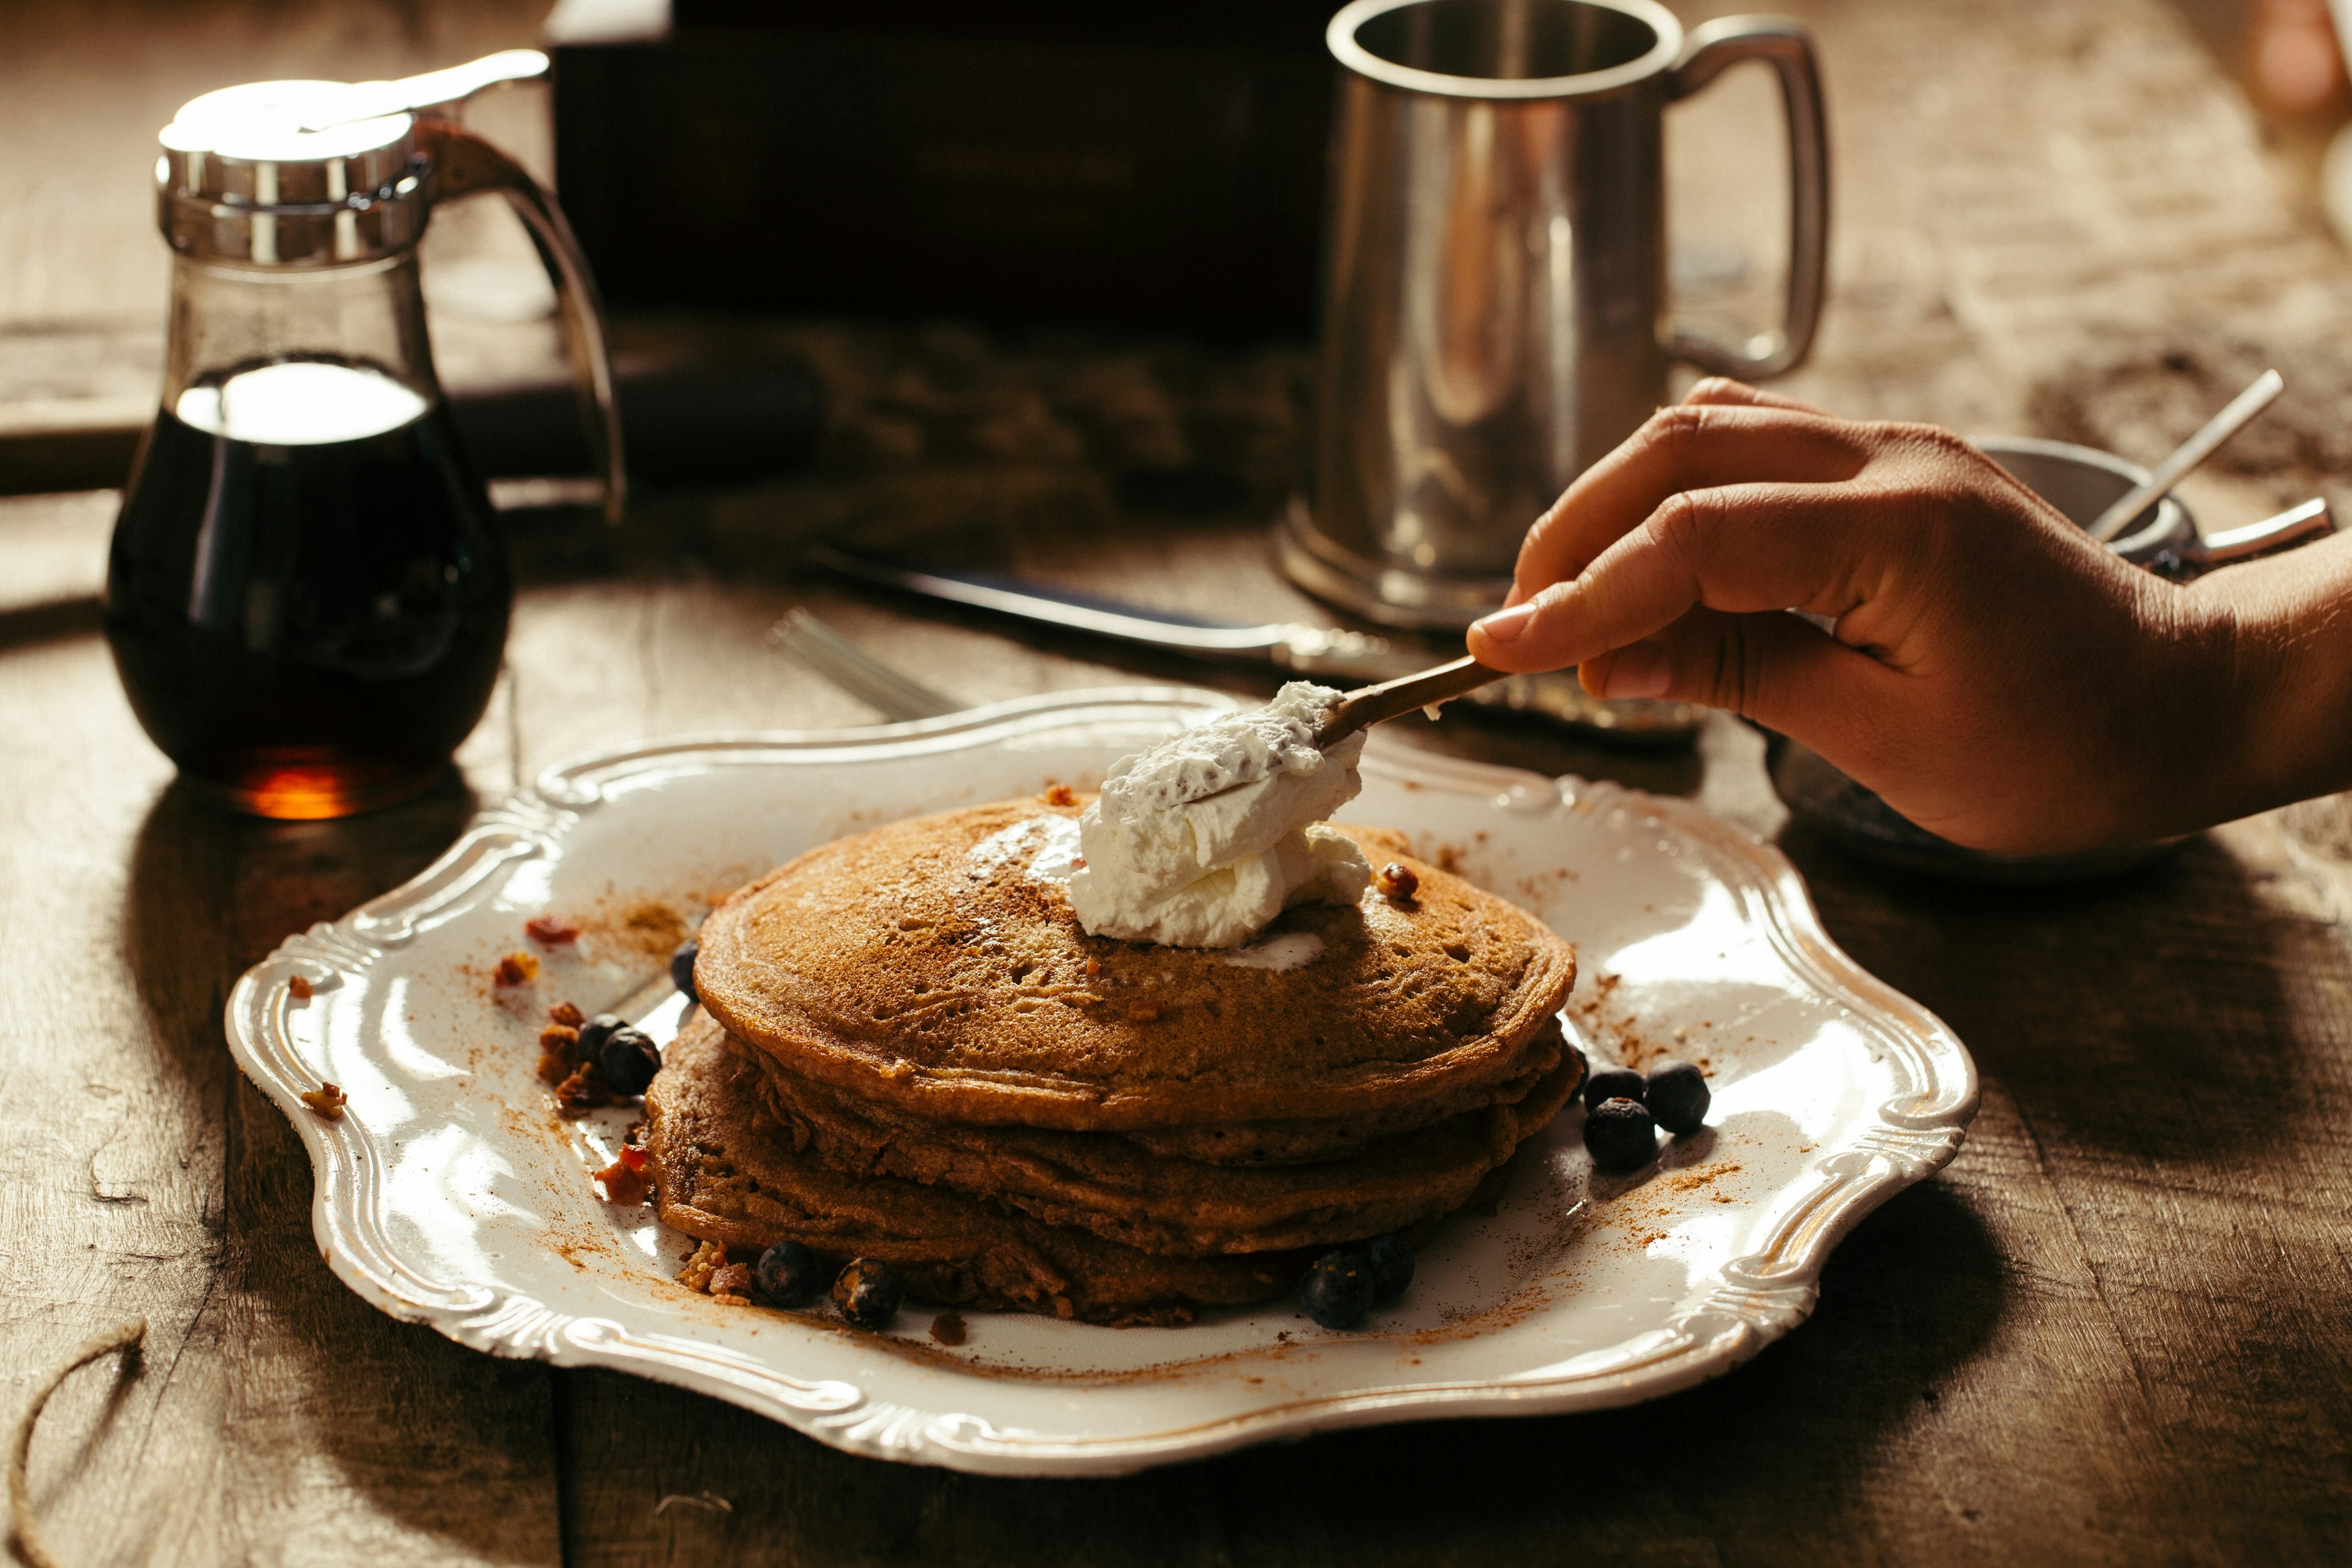 A person spreading butter on a stack of pancakes, with syrup and coffee next to the plate.